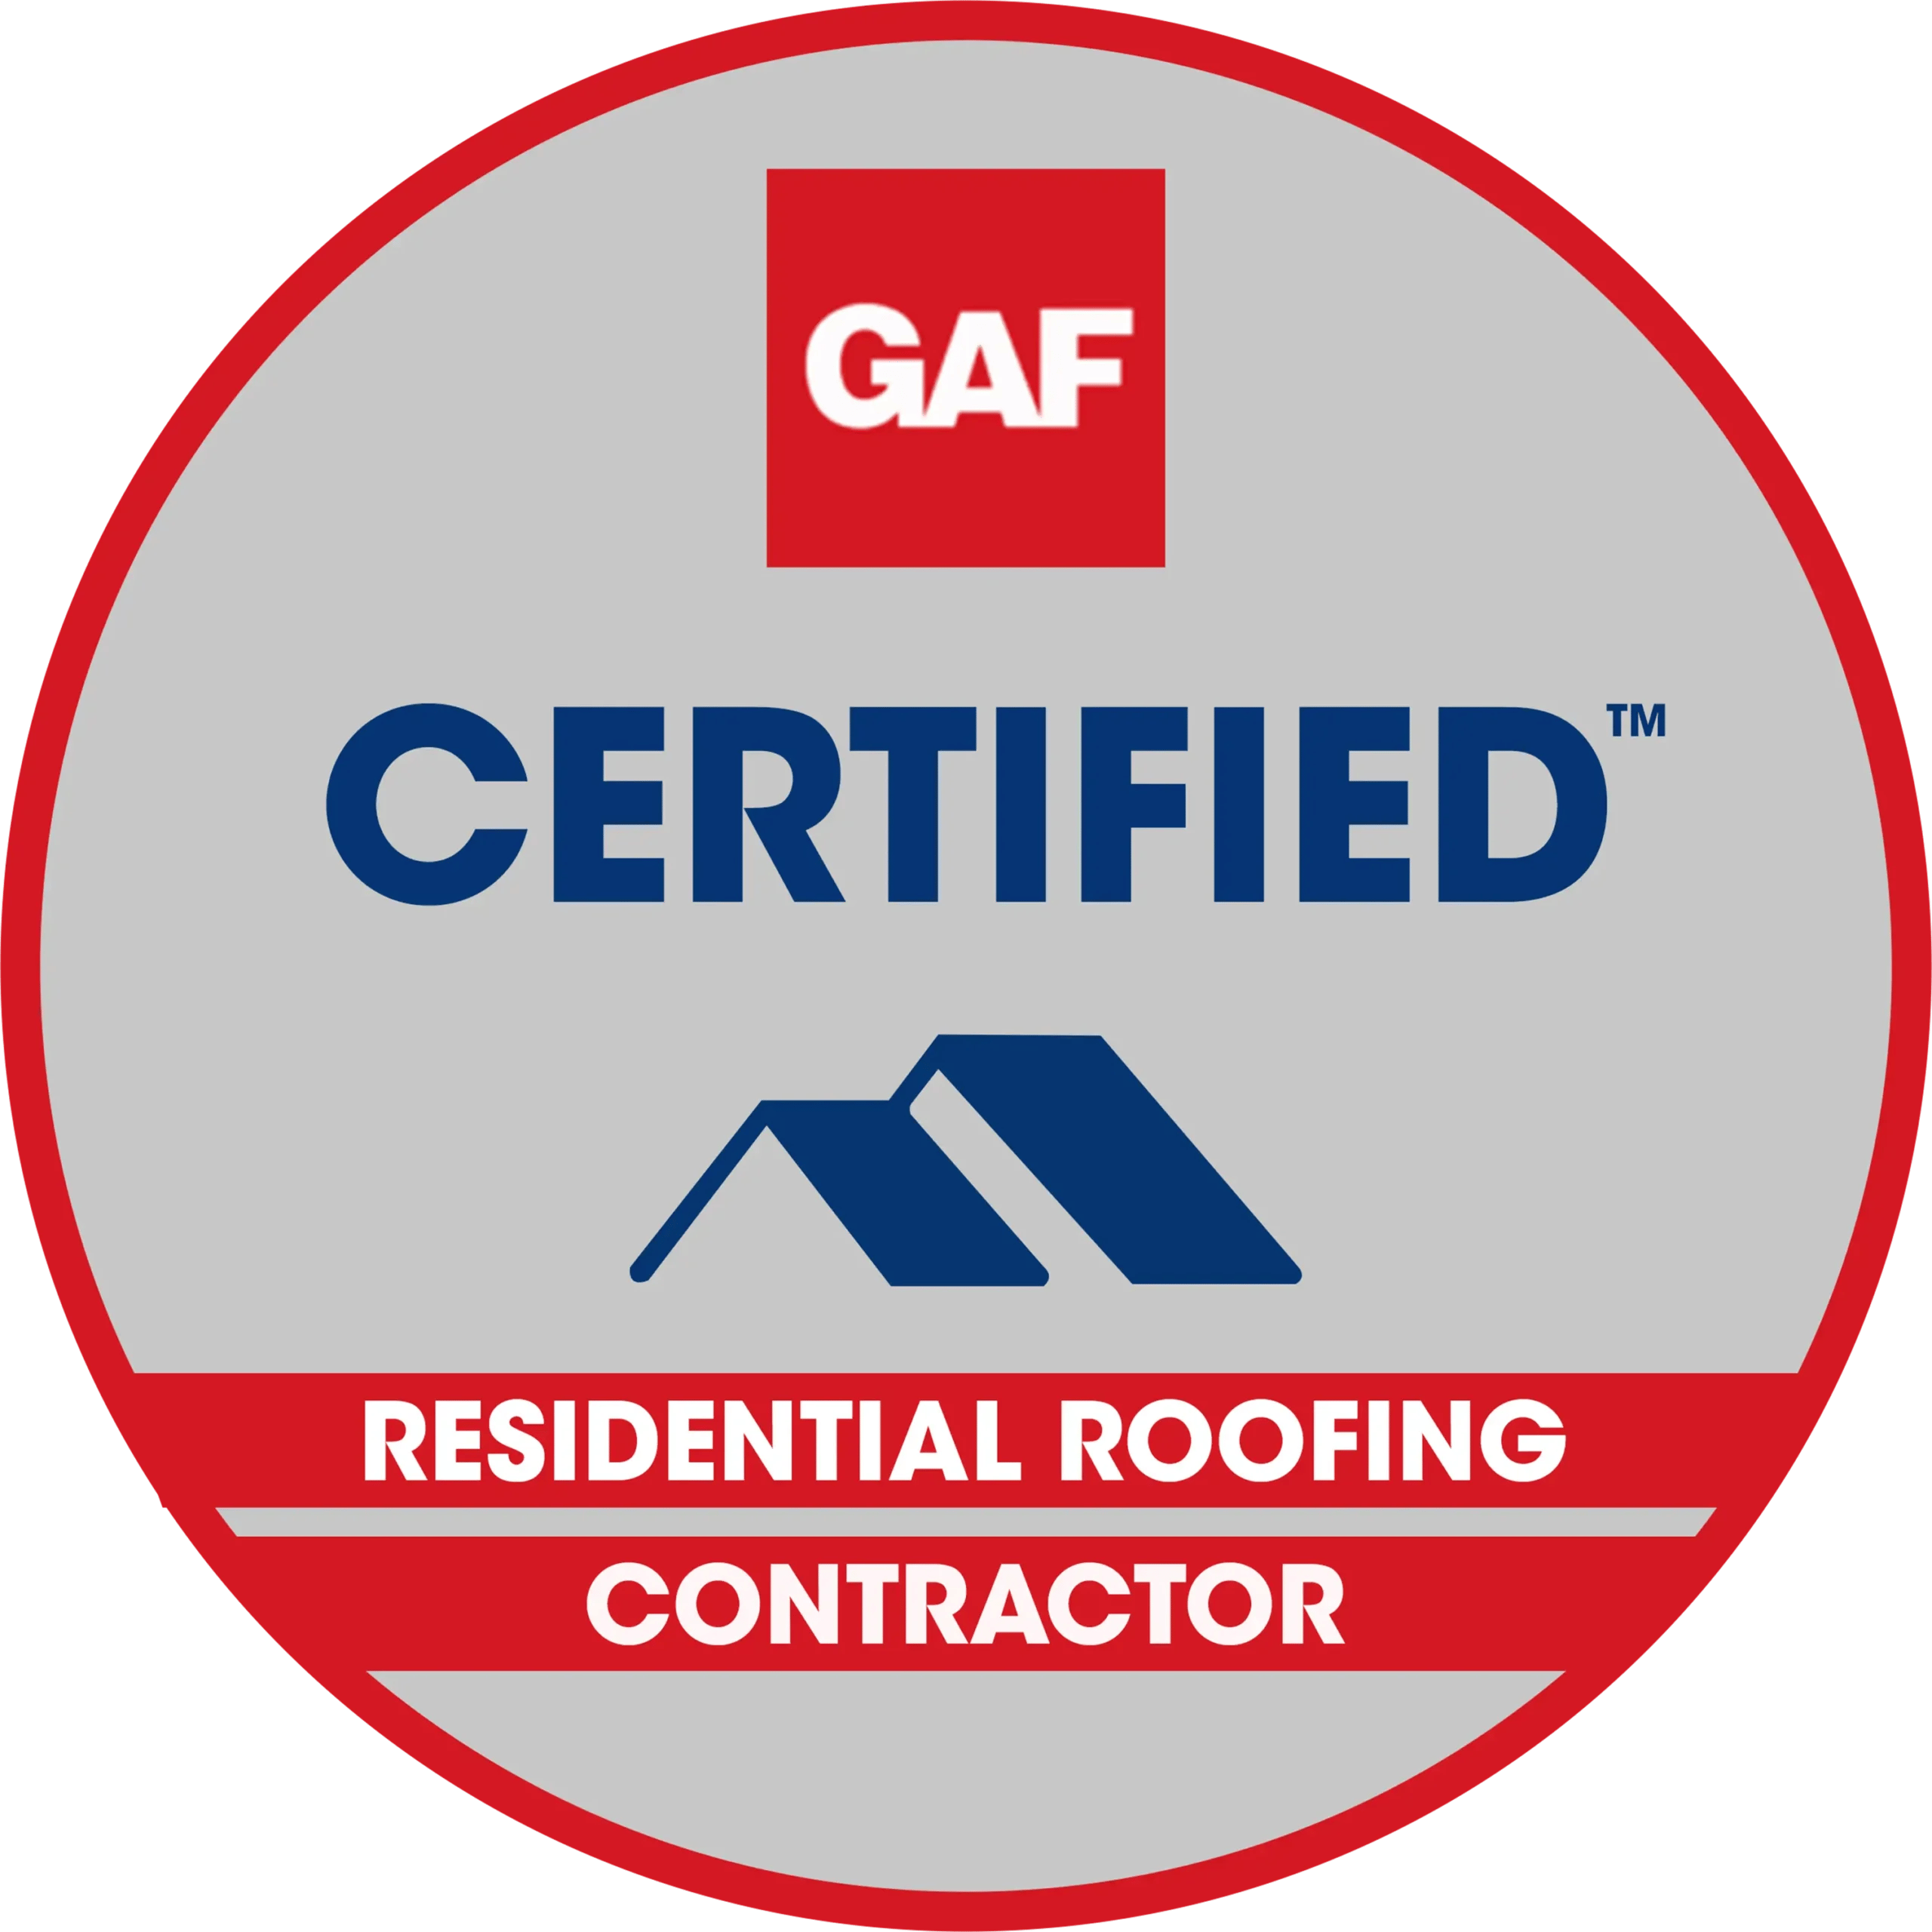 GAF certified residential roofing contractor